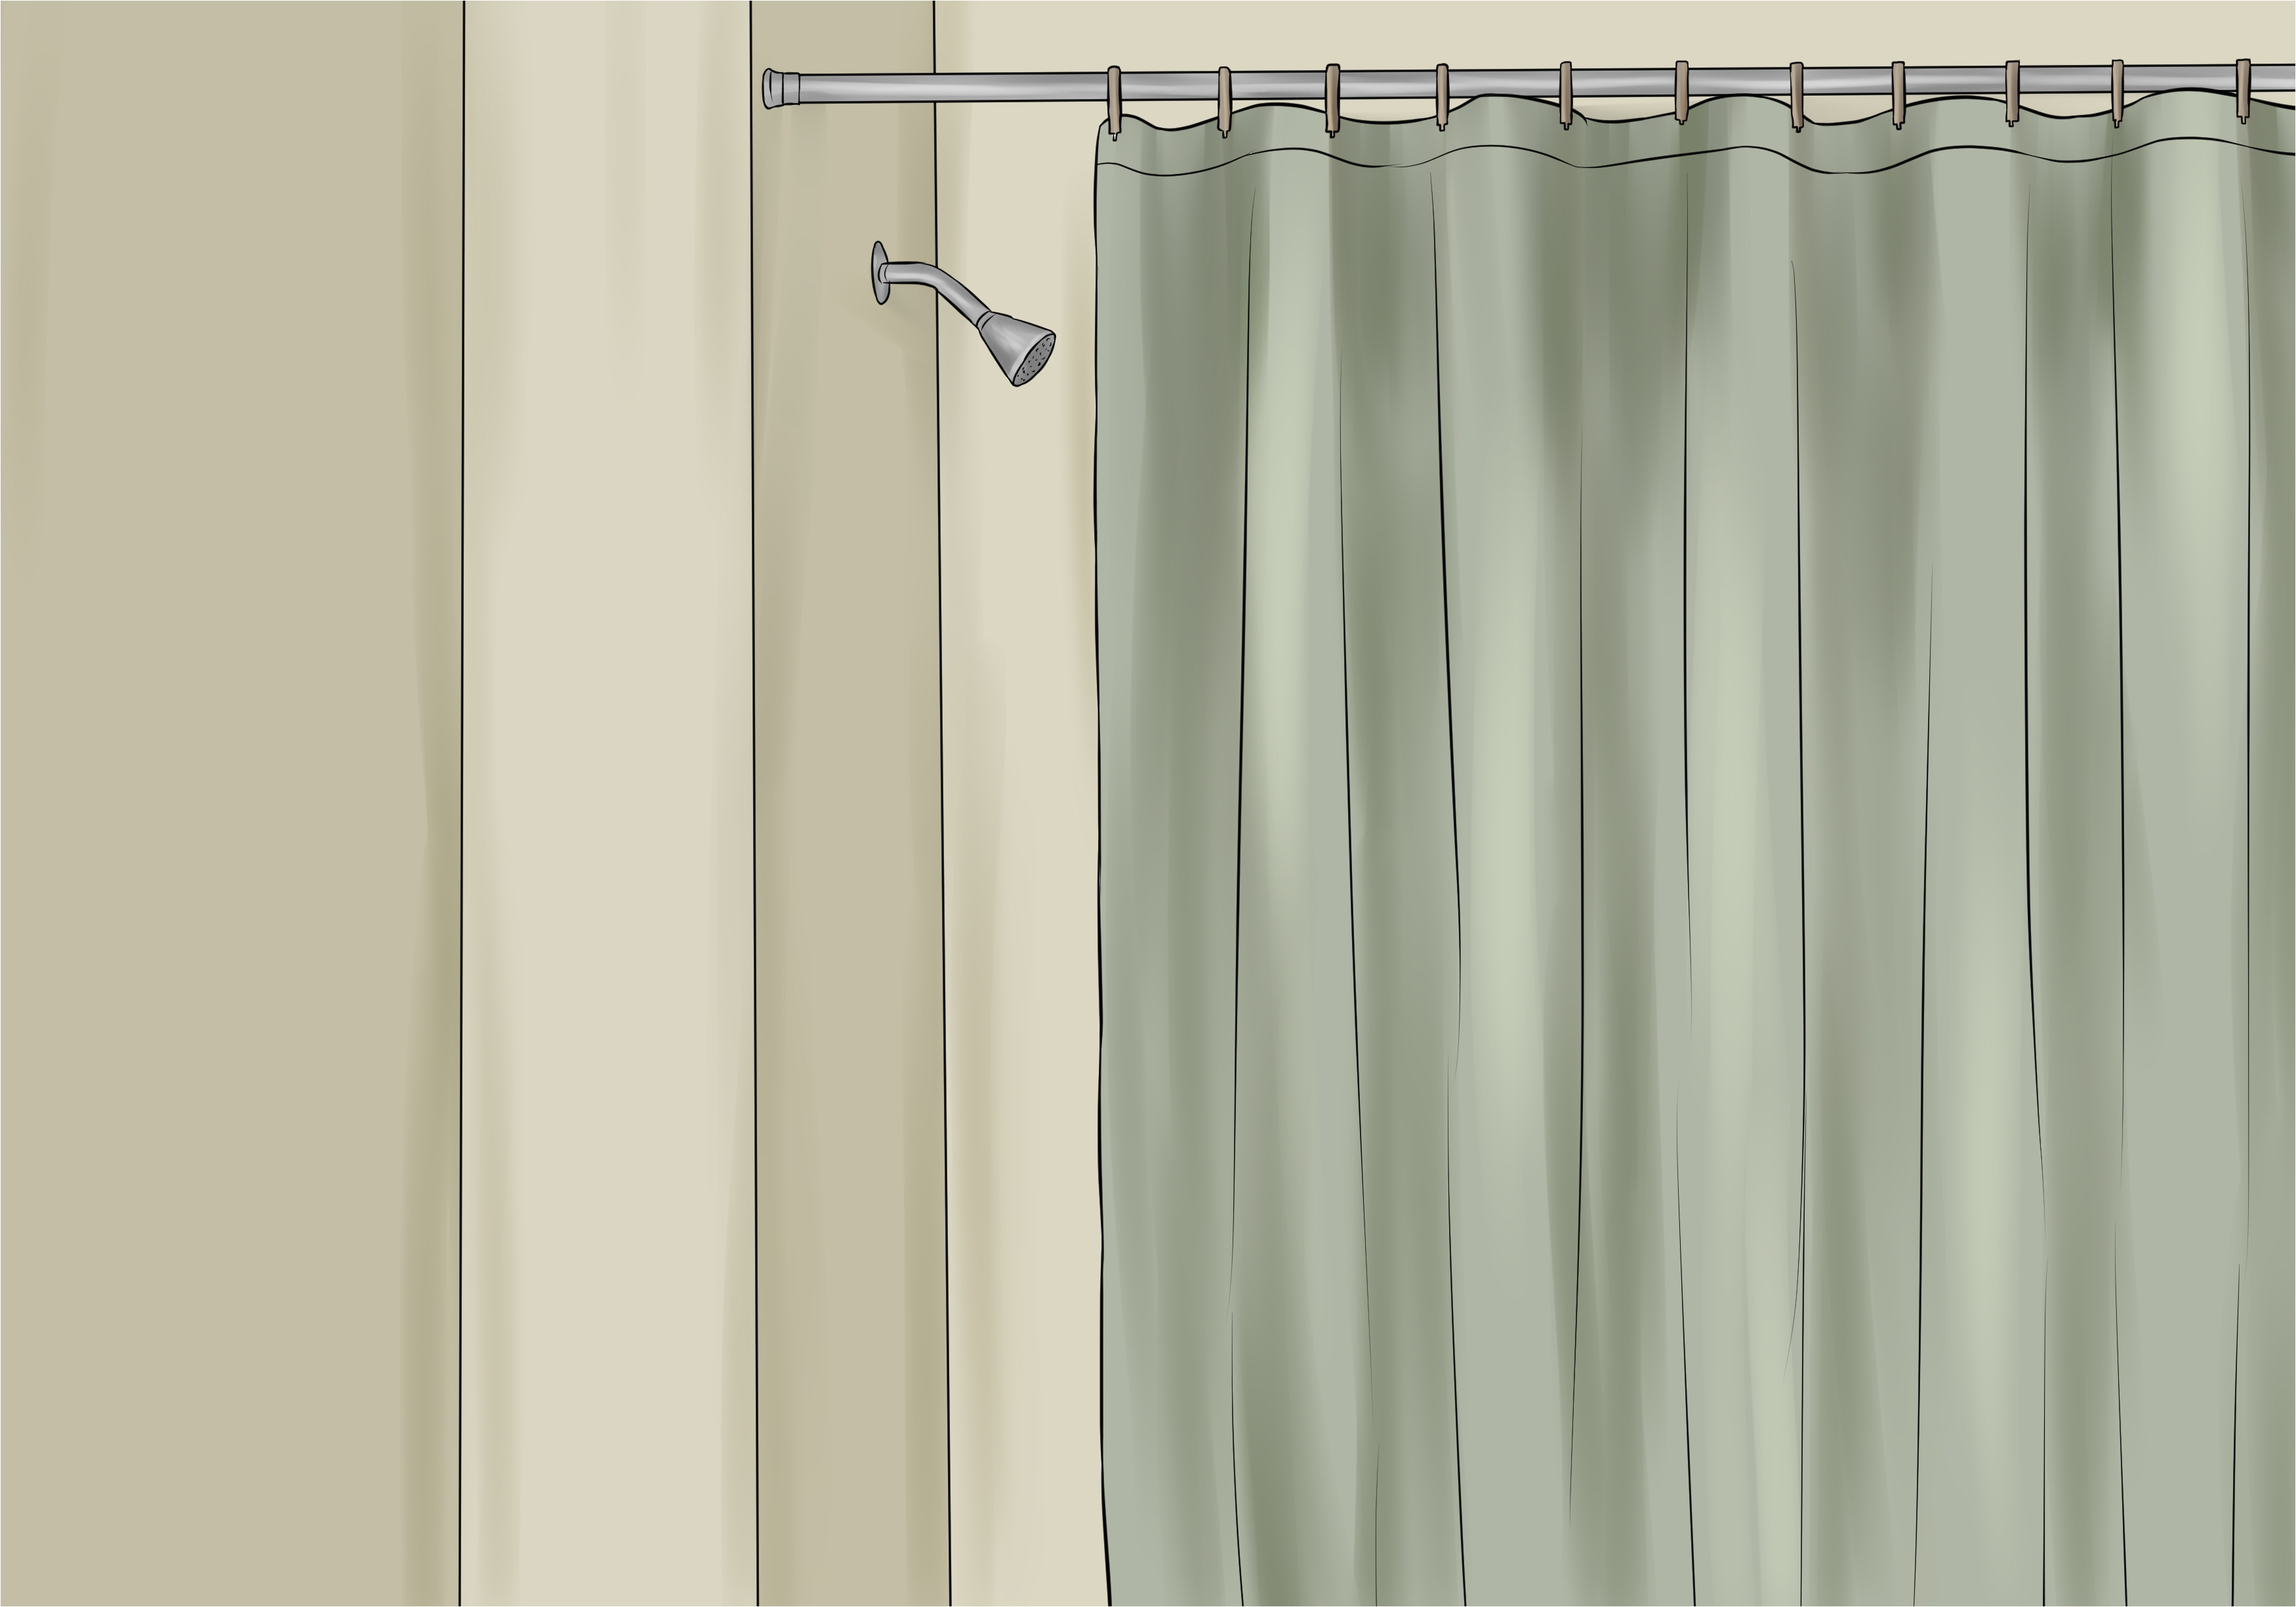 Outdoor Curtain Rod with Post Set How to Install A Shower Curtain 15 Steps with Pictures